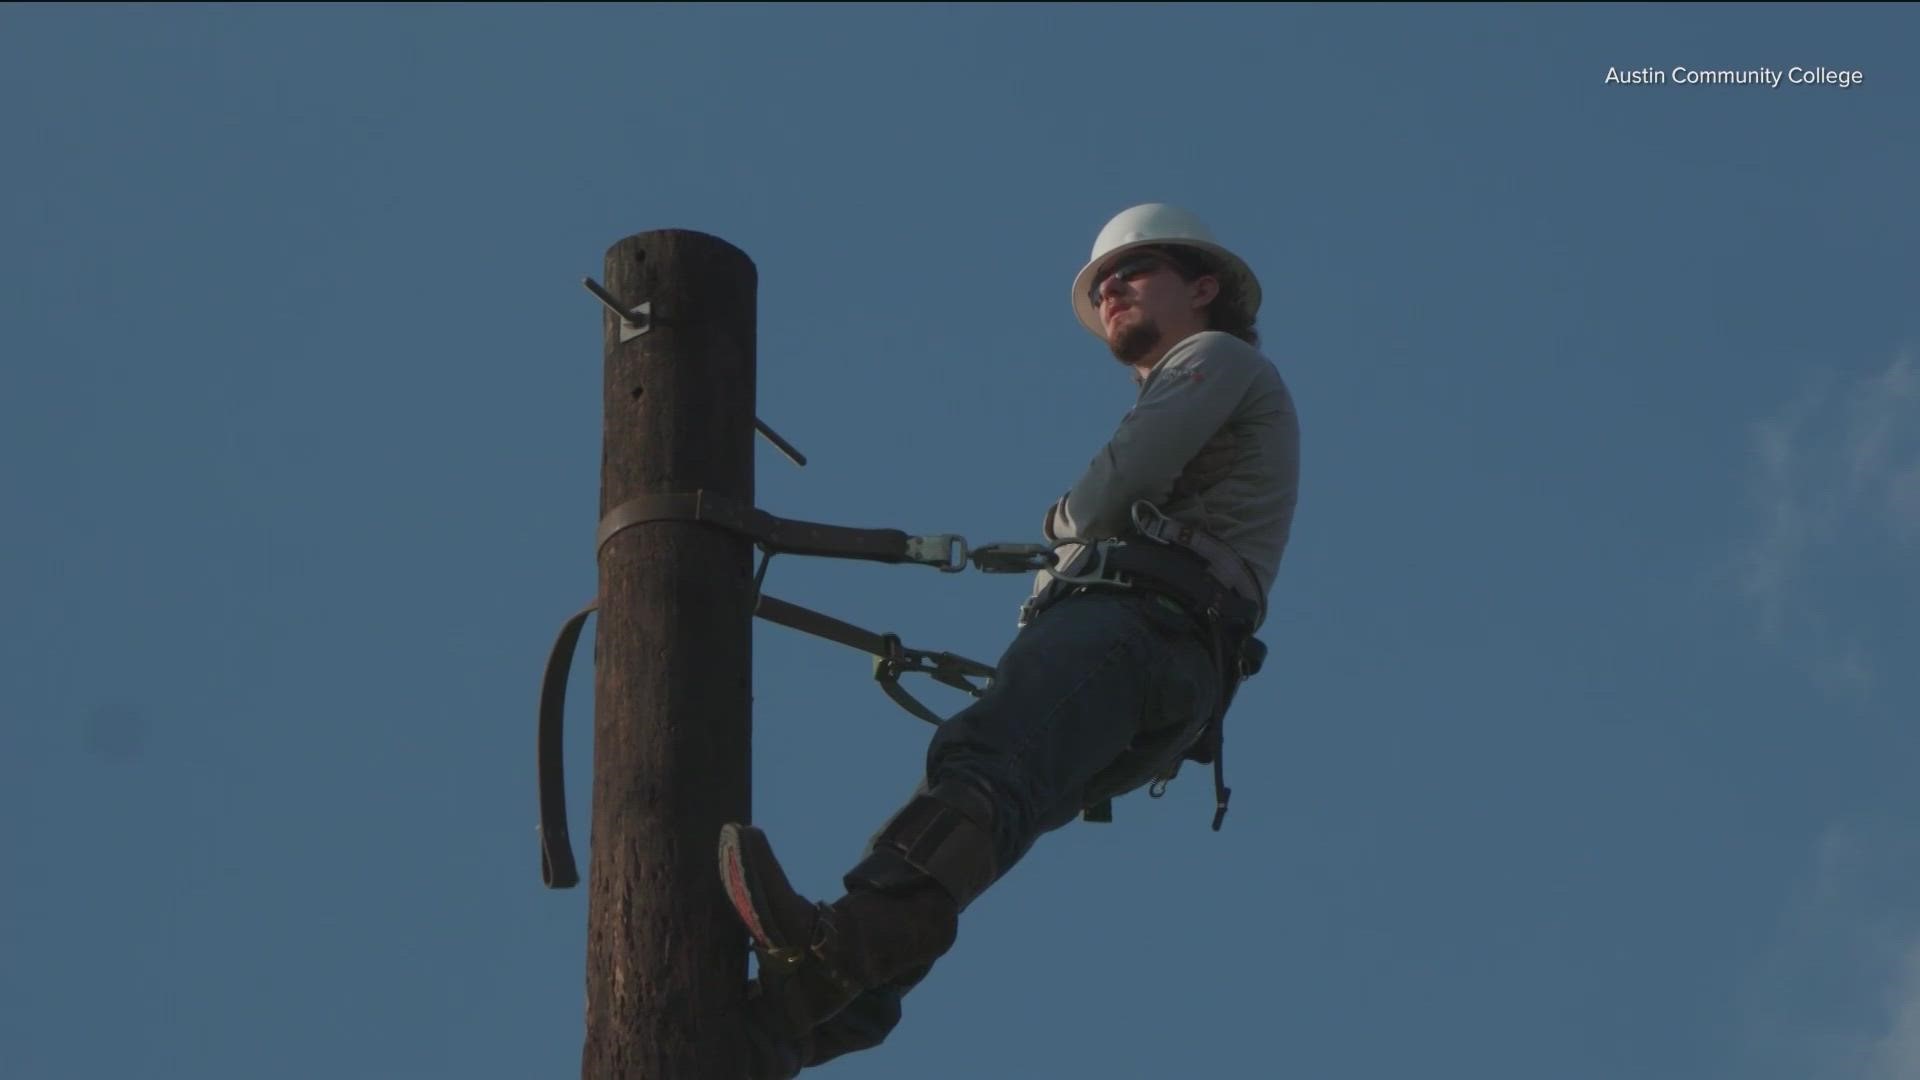 Following the recent winter storm that left thousands in the dark for days, Austin Community College is making it easier for people to become lineworkers.